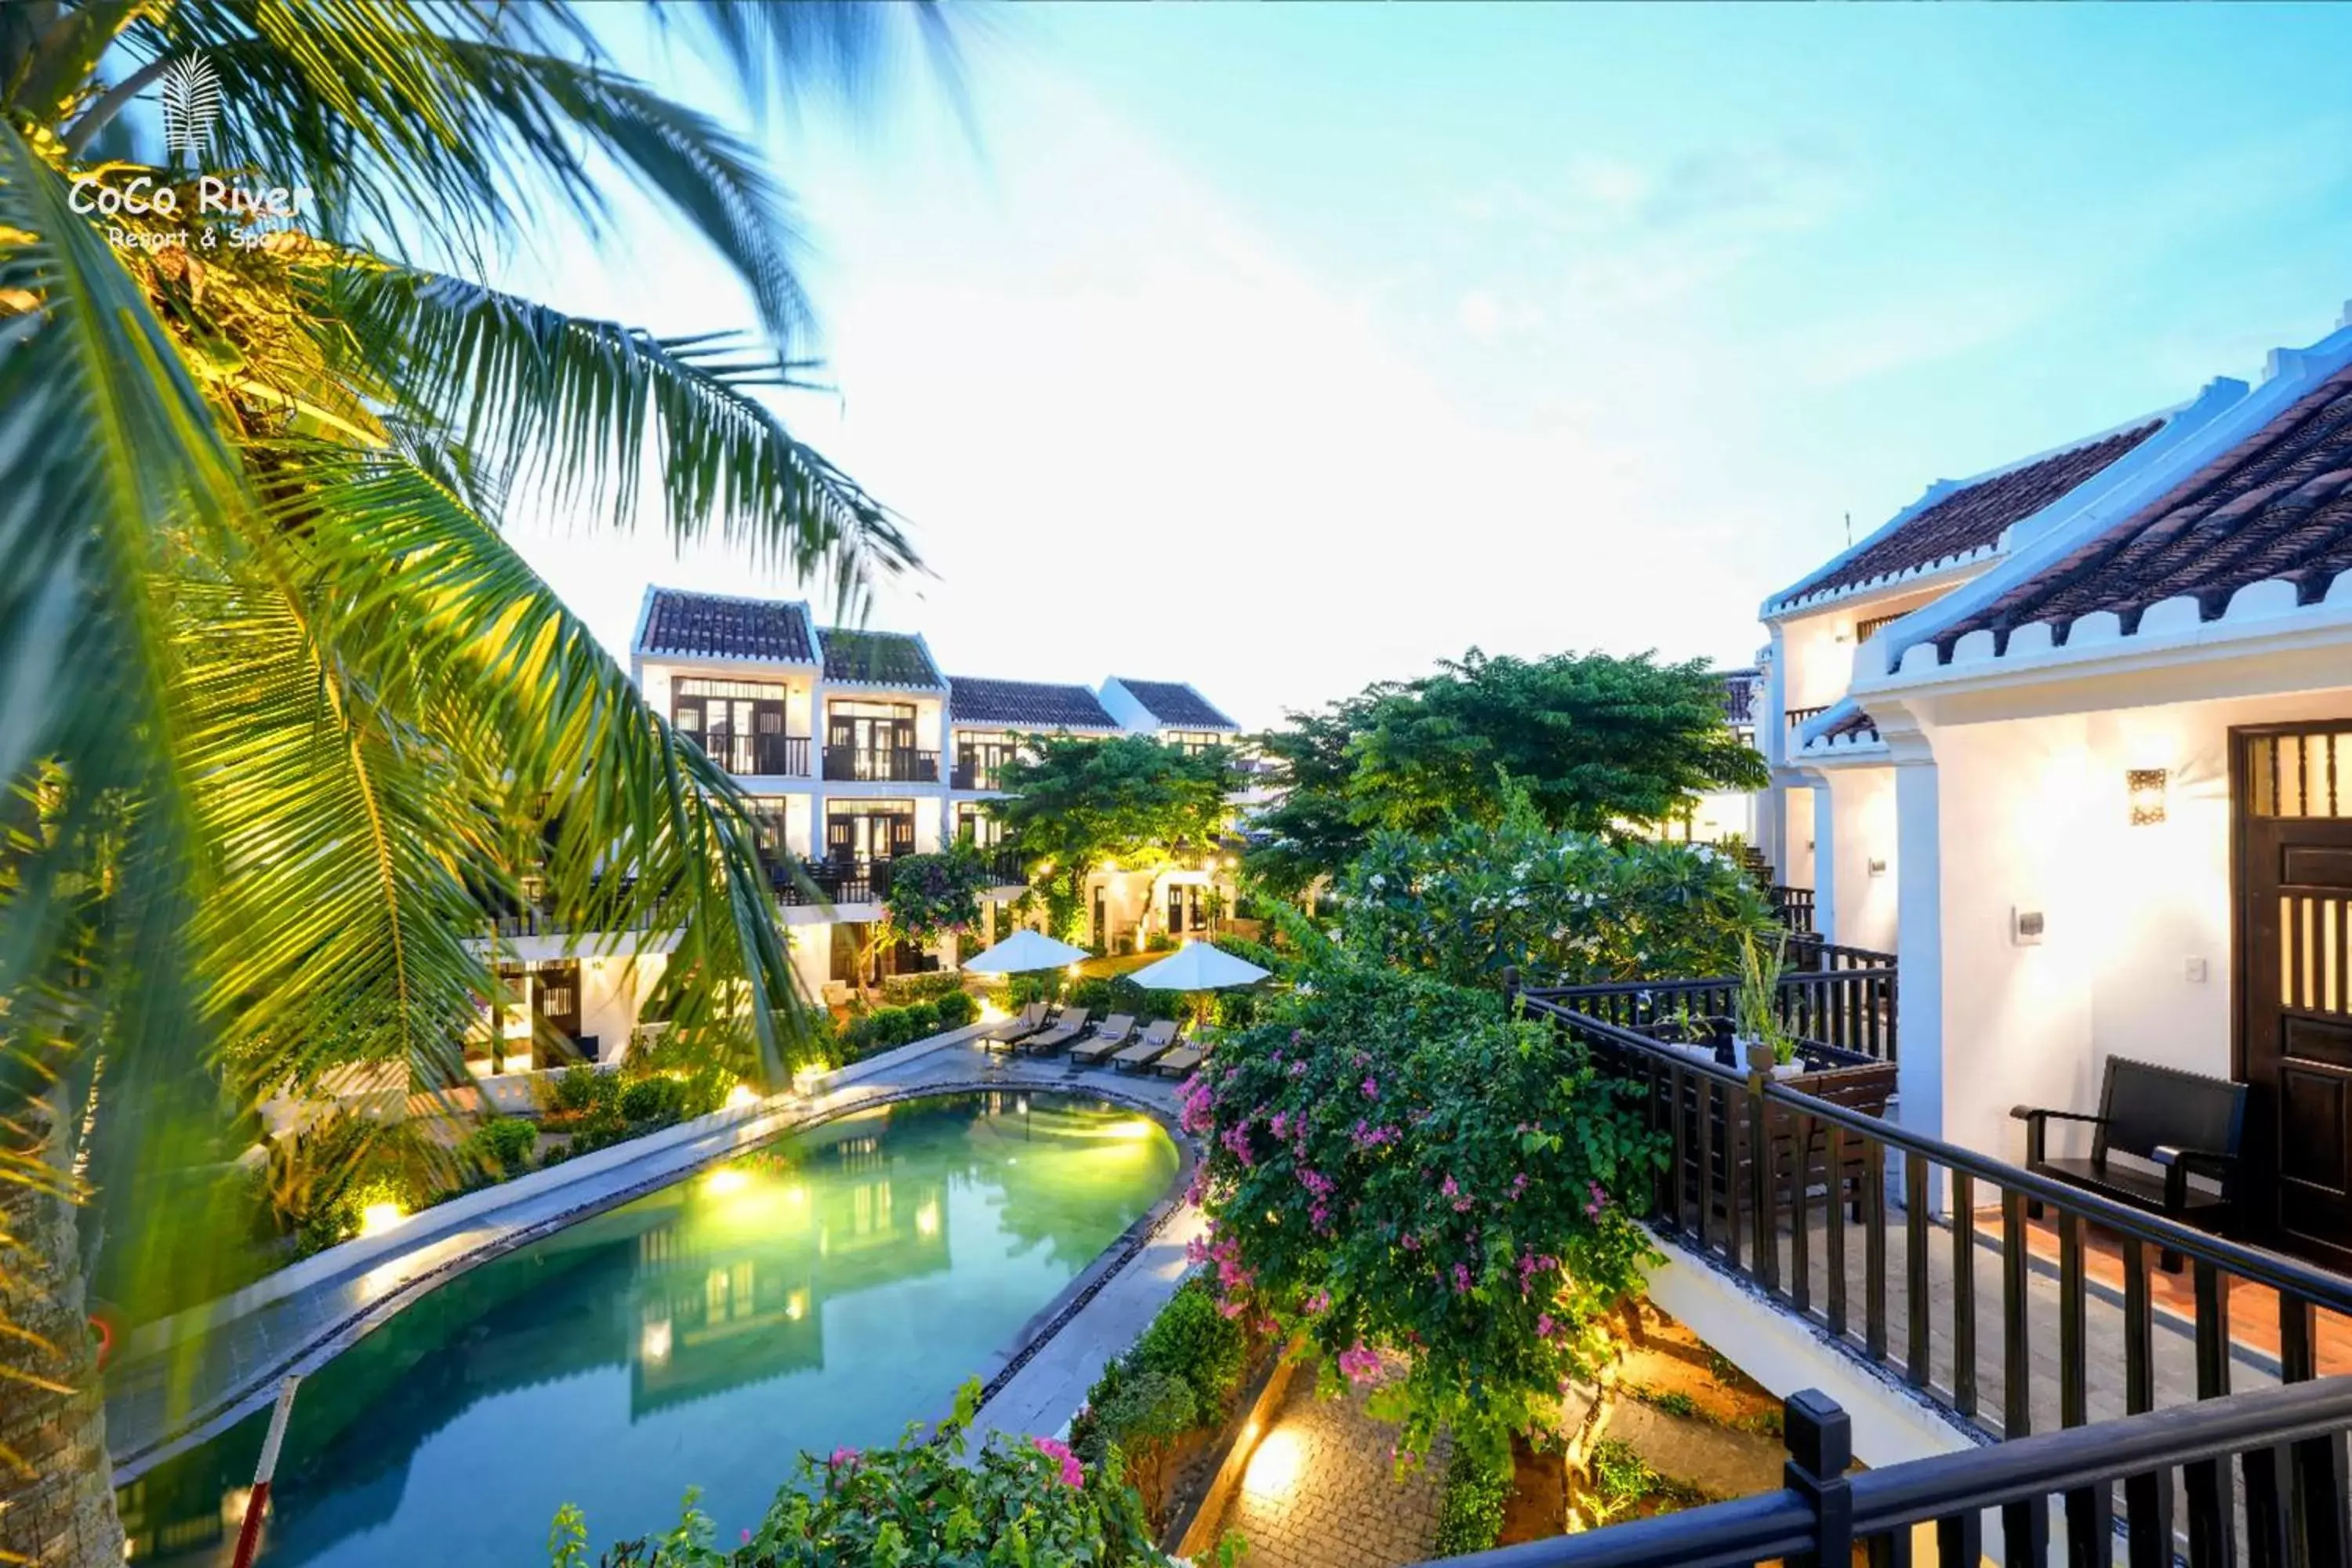 Property building, Pool View in Hoi An Coco River Resort & Spa